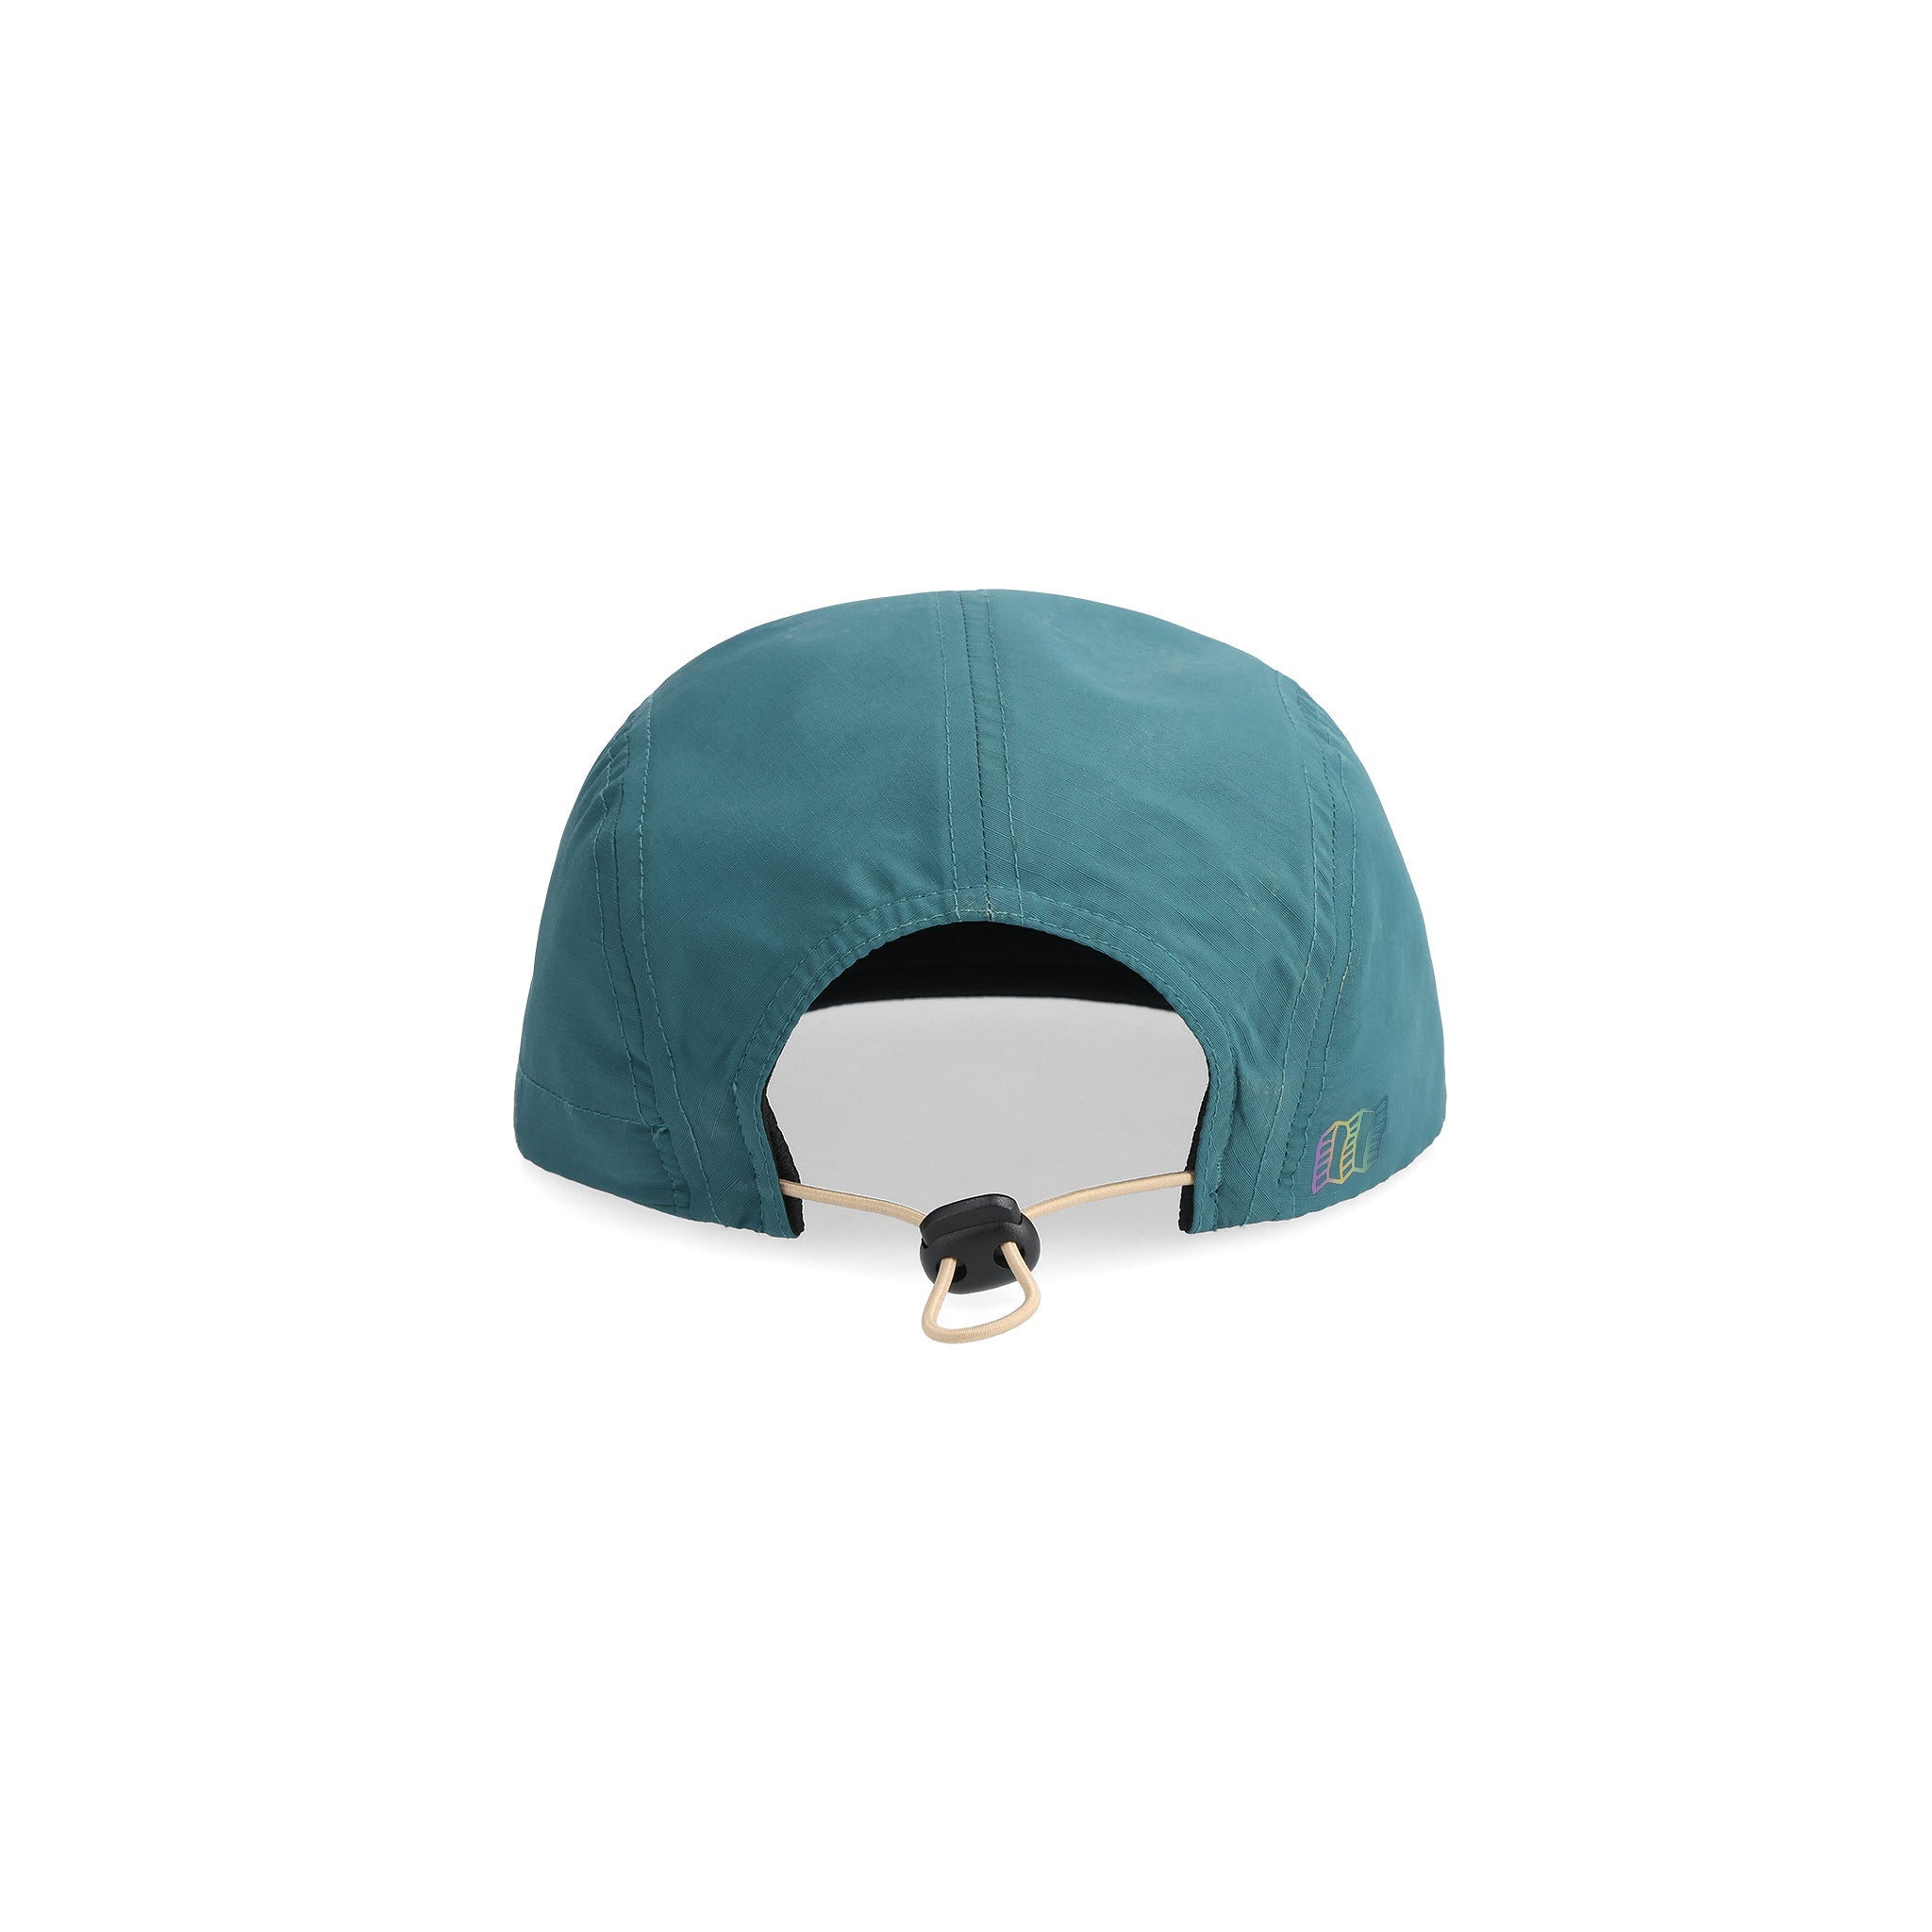 Back View of Topo Designs Global Packable Hat in "Pond Blue"